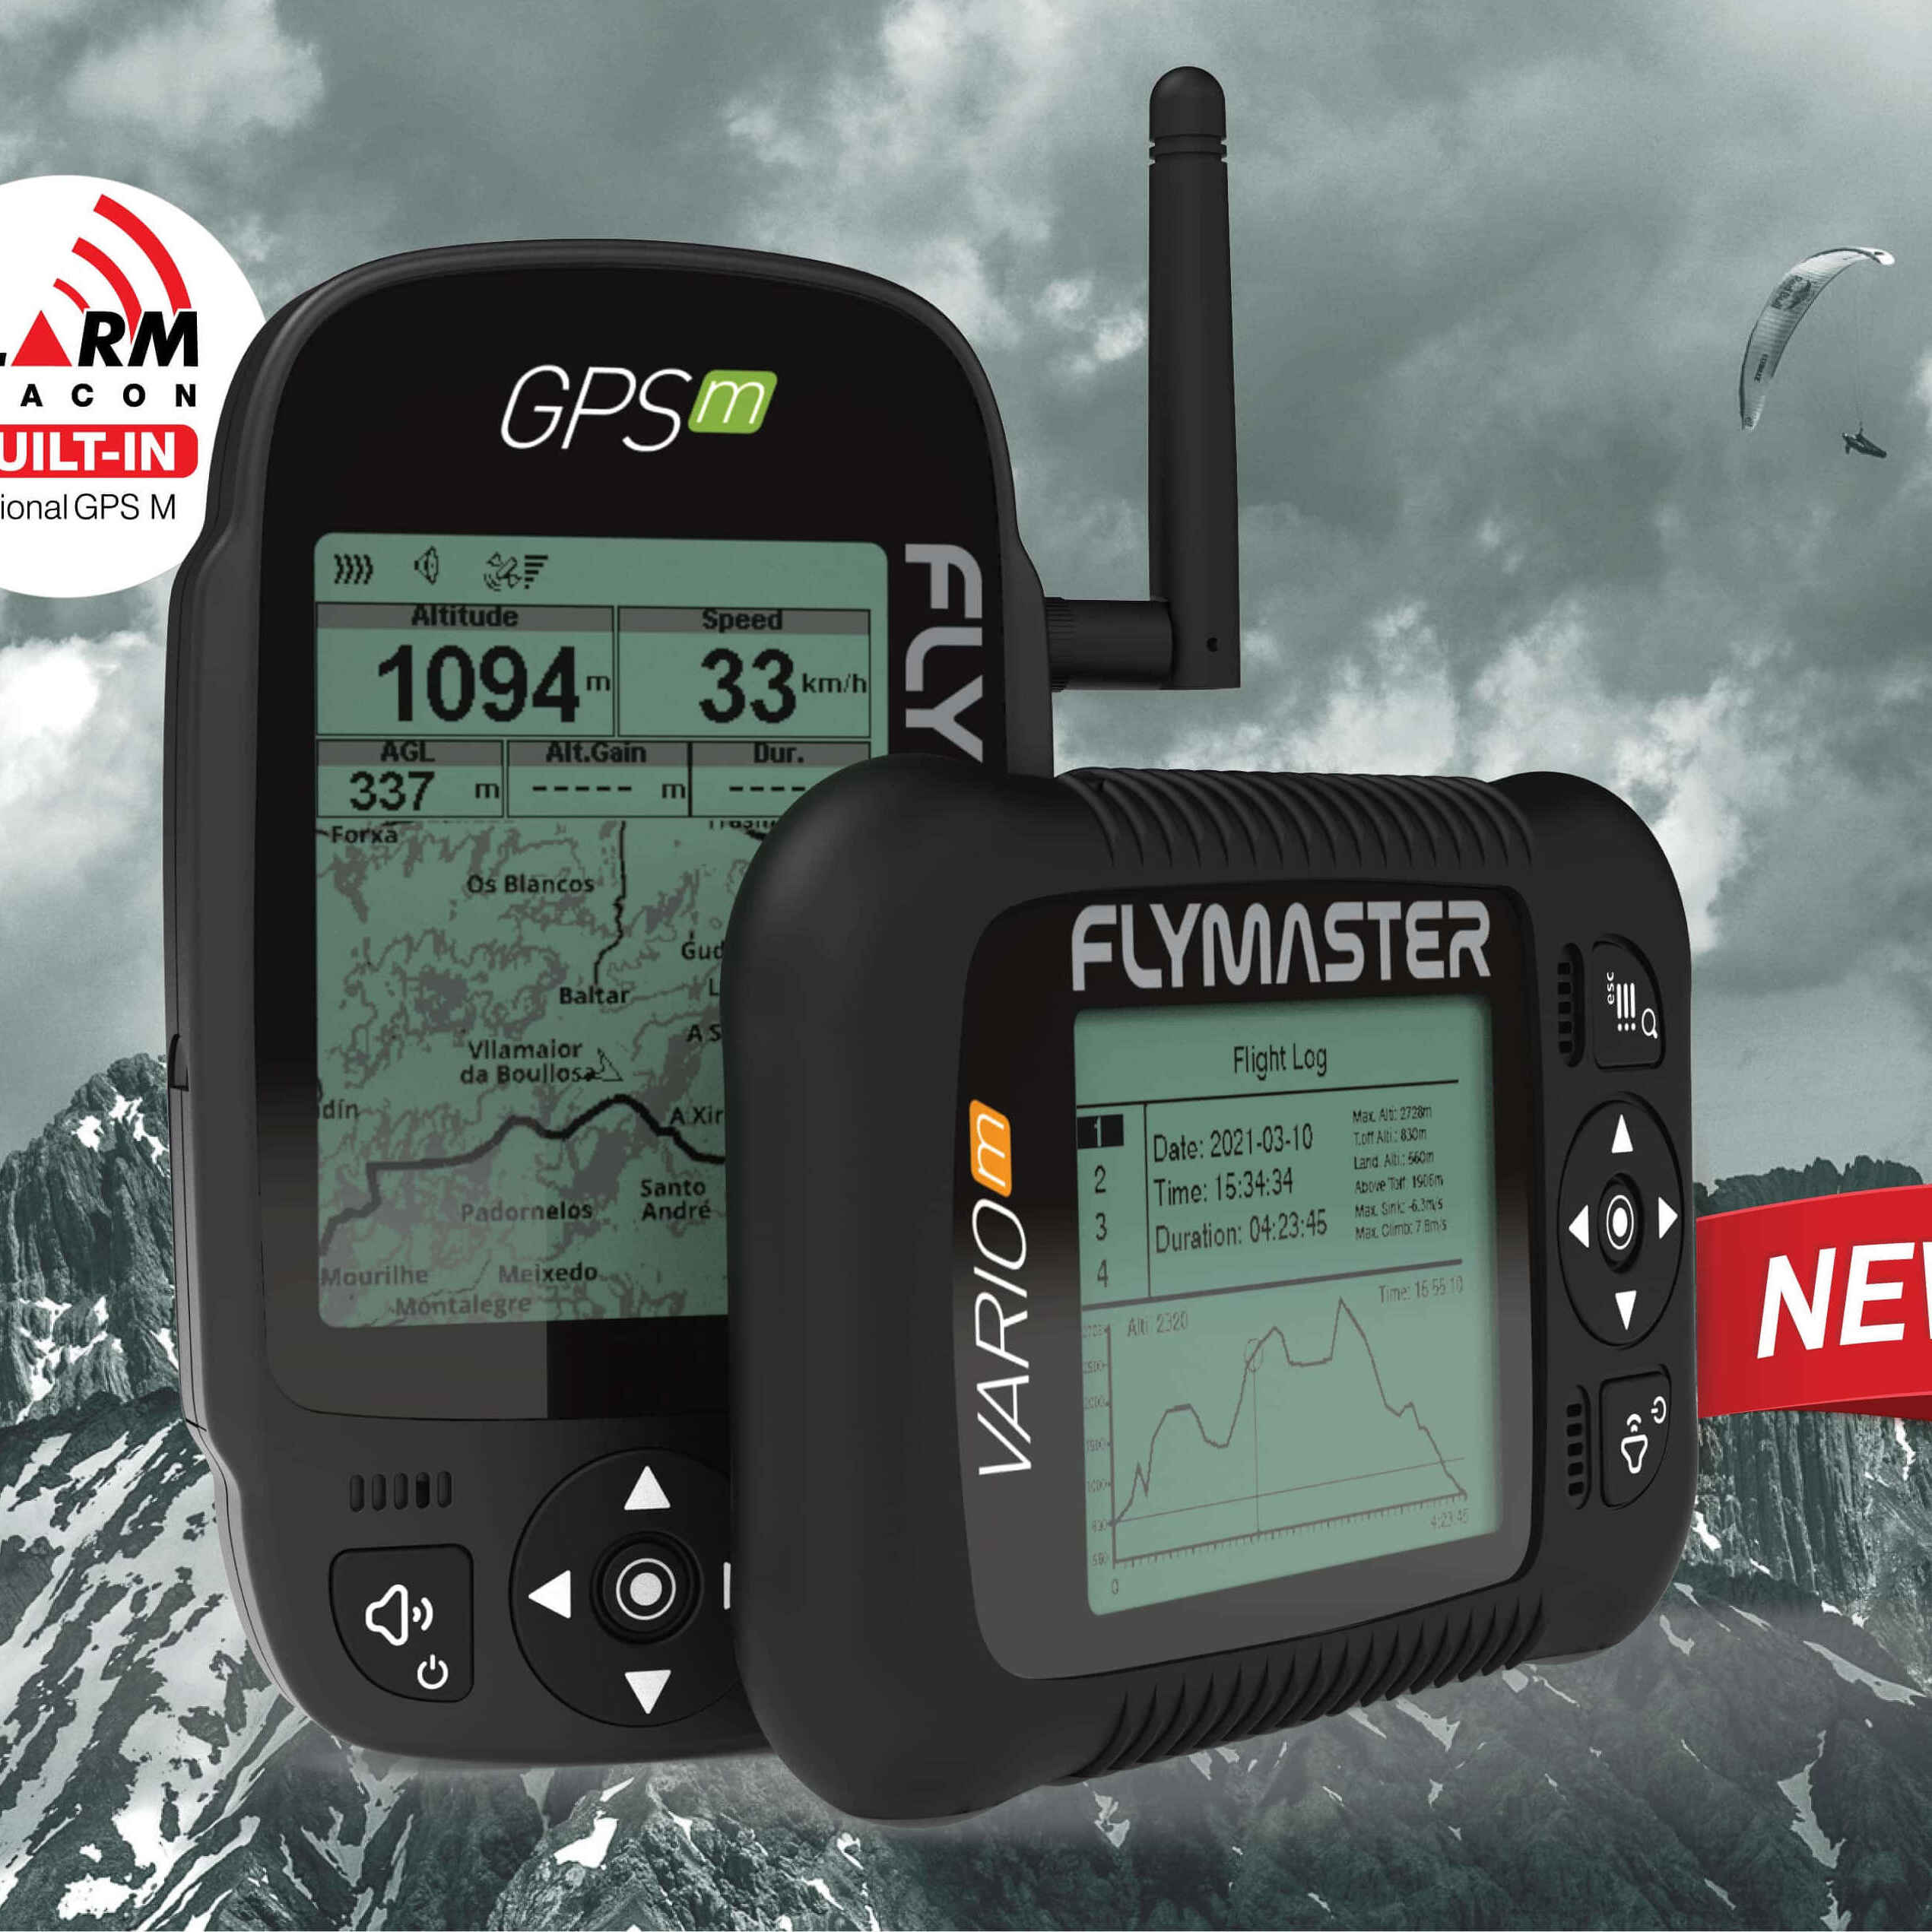 New flymaster m series gps with flarm